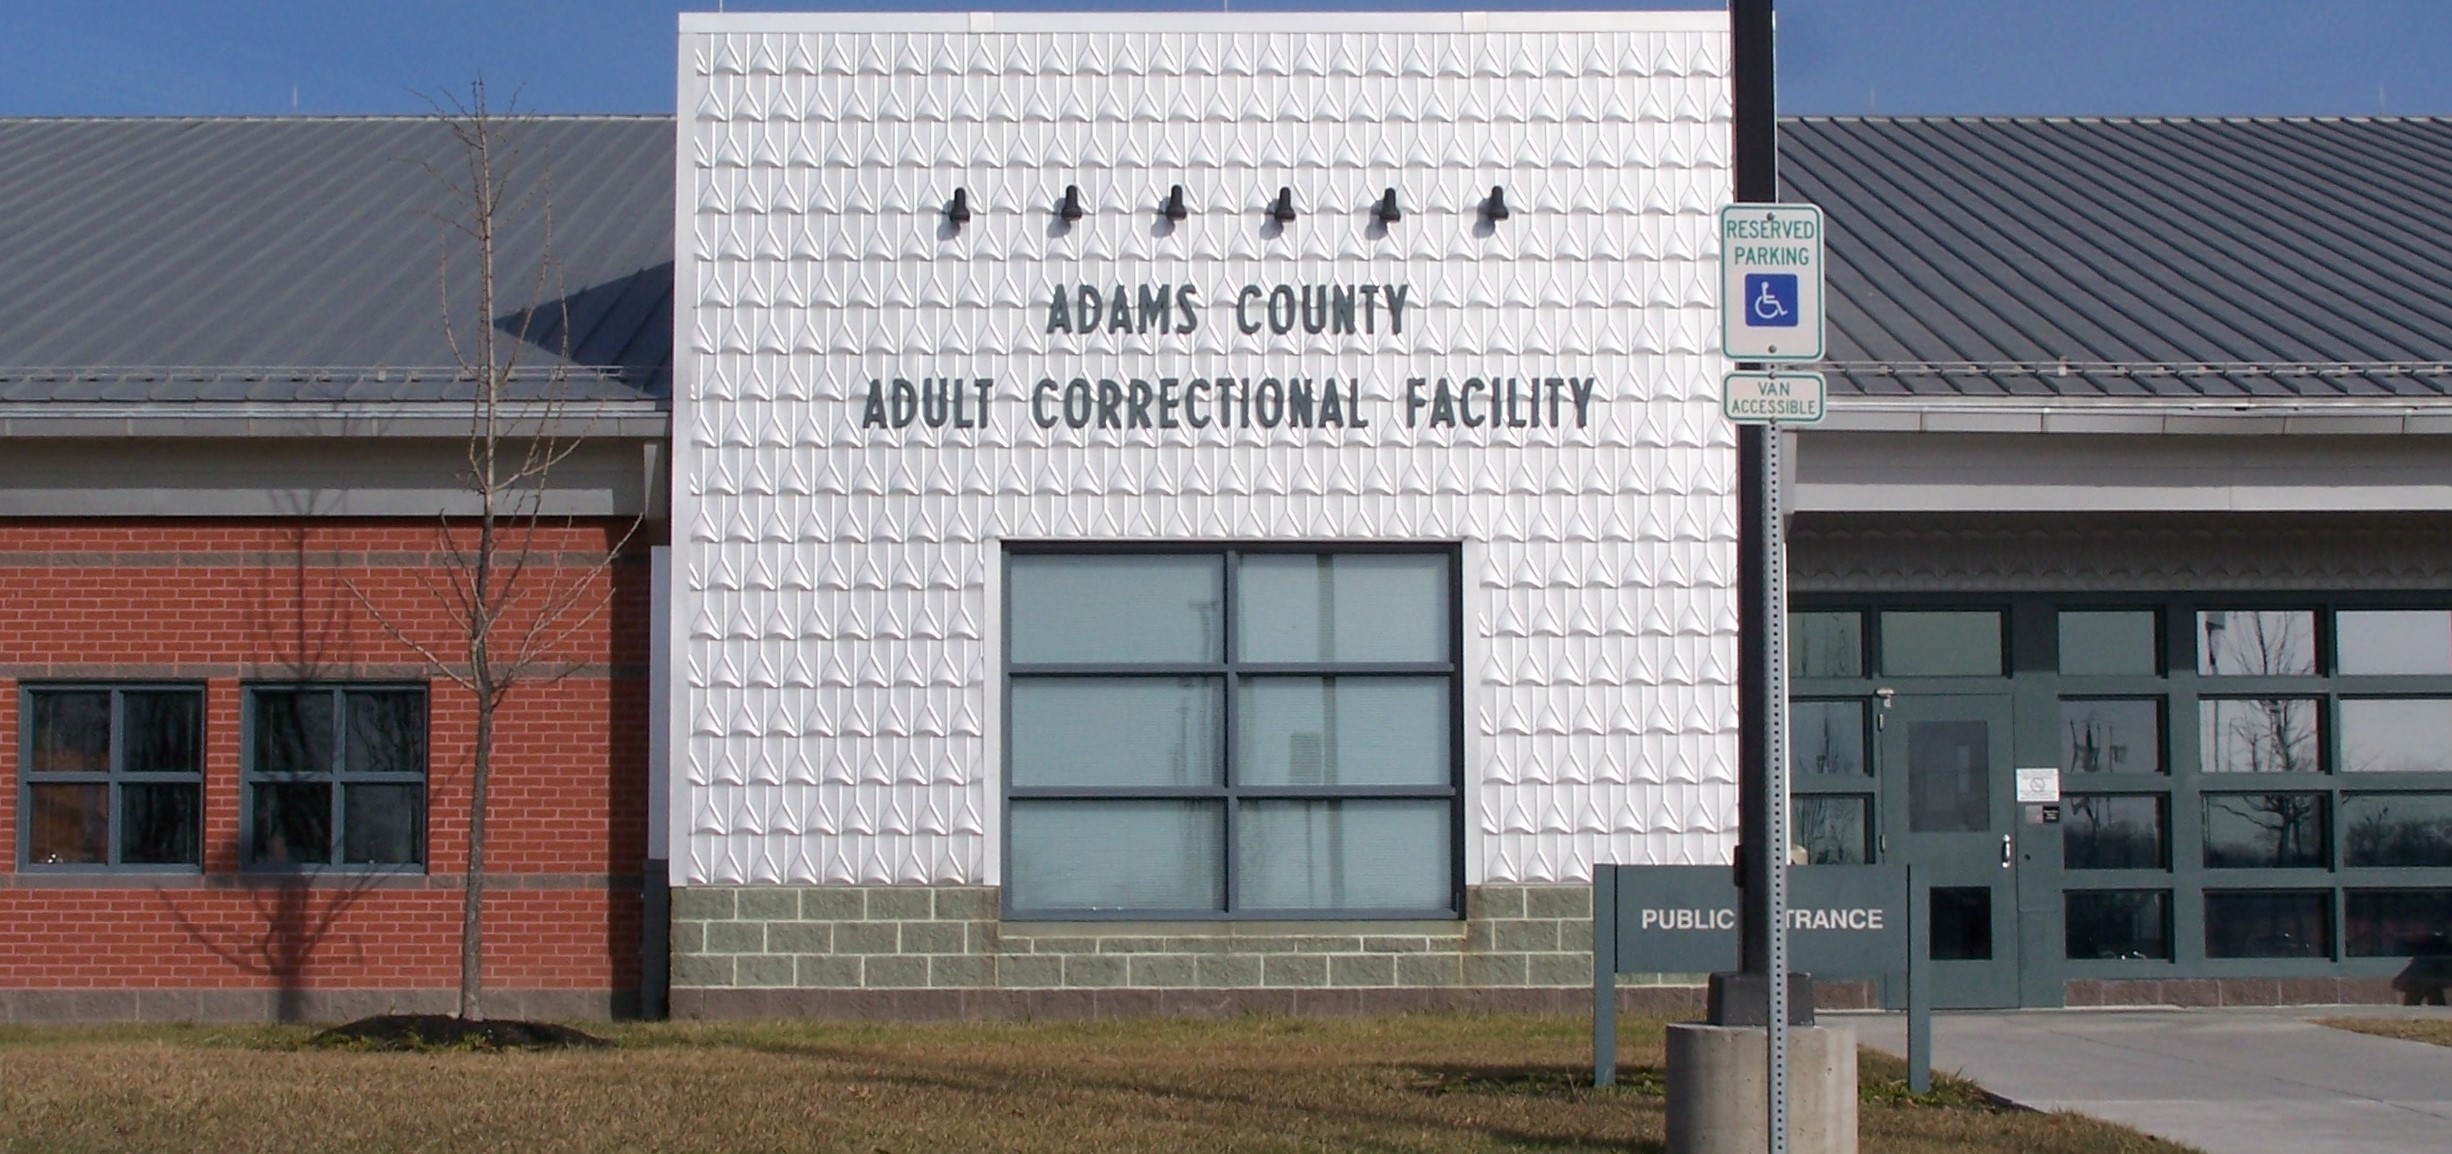 Image of Adams County Adult Correctional Complex